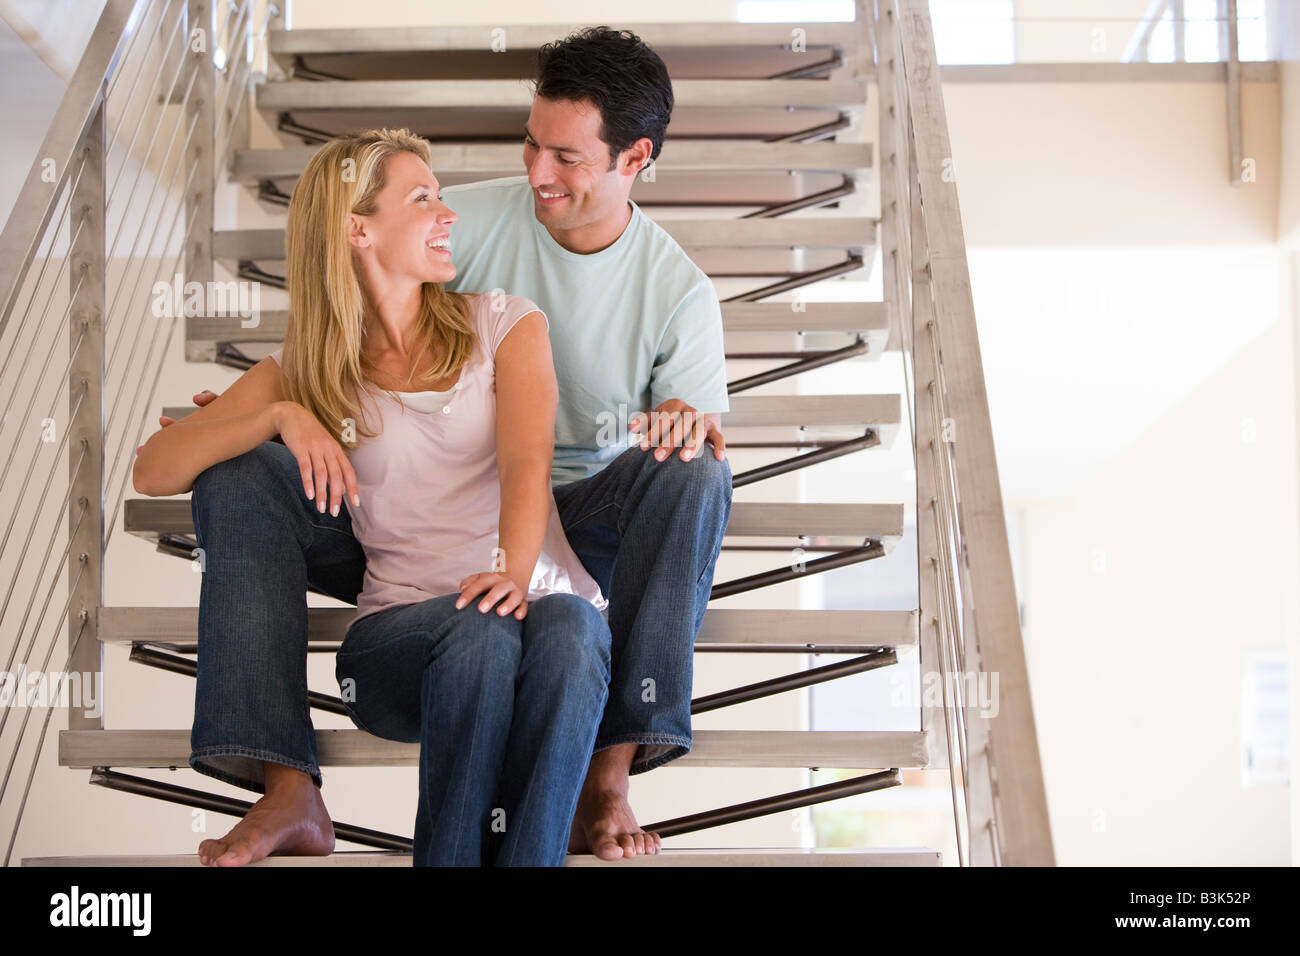 Couple sitting on staircase smiling Banque D'Images